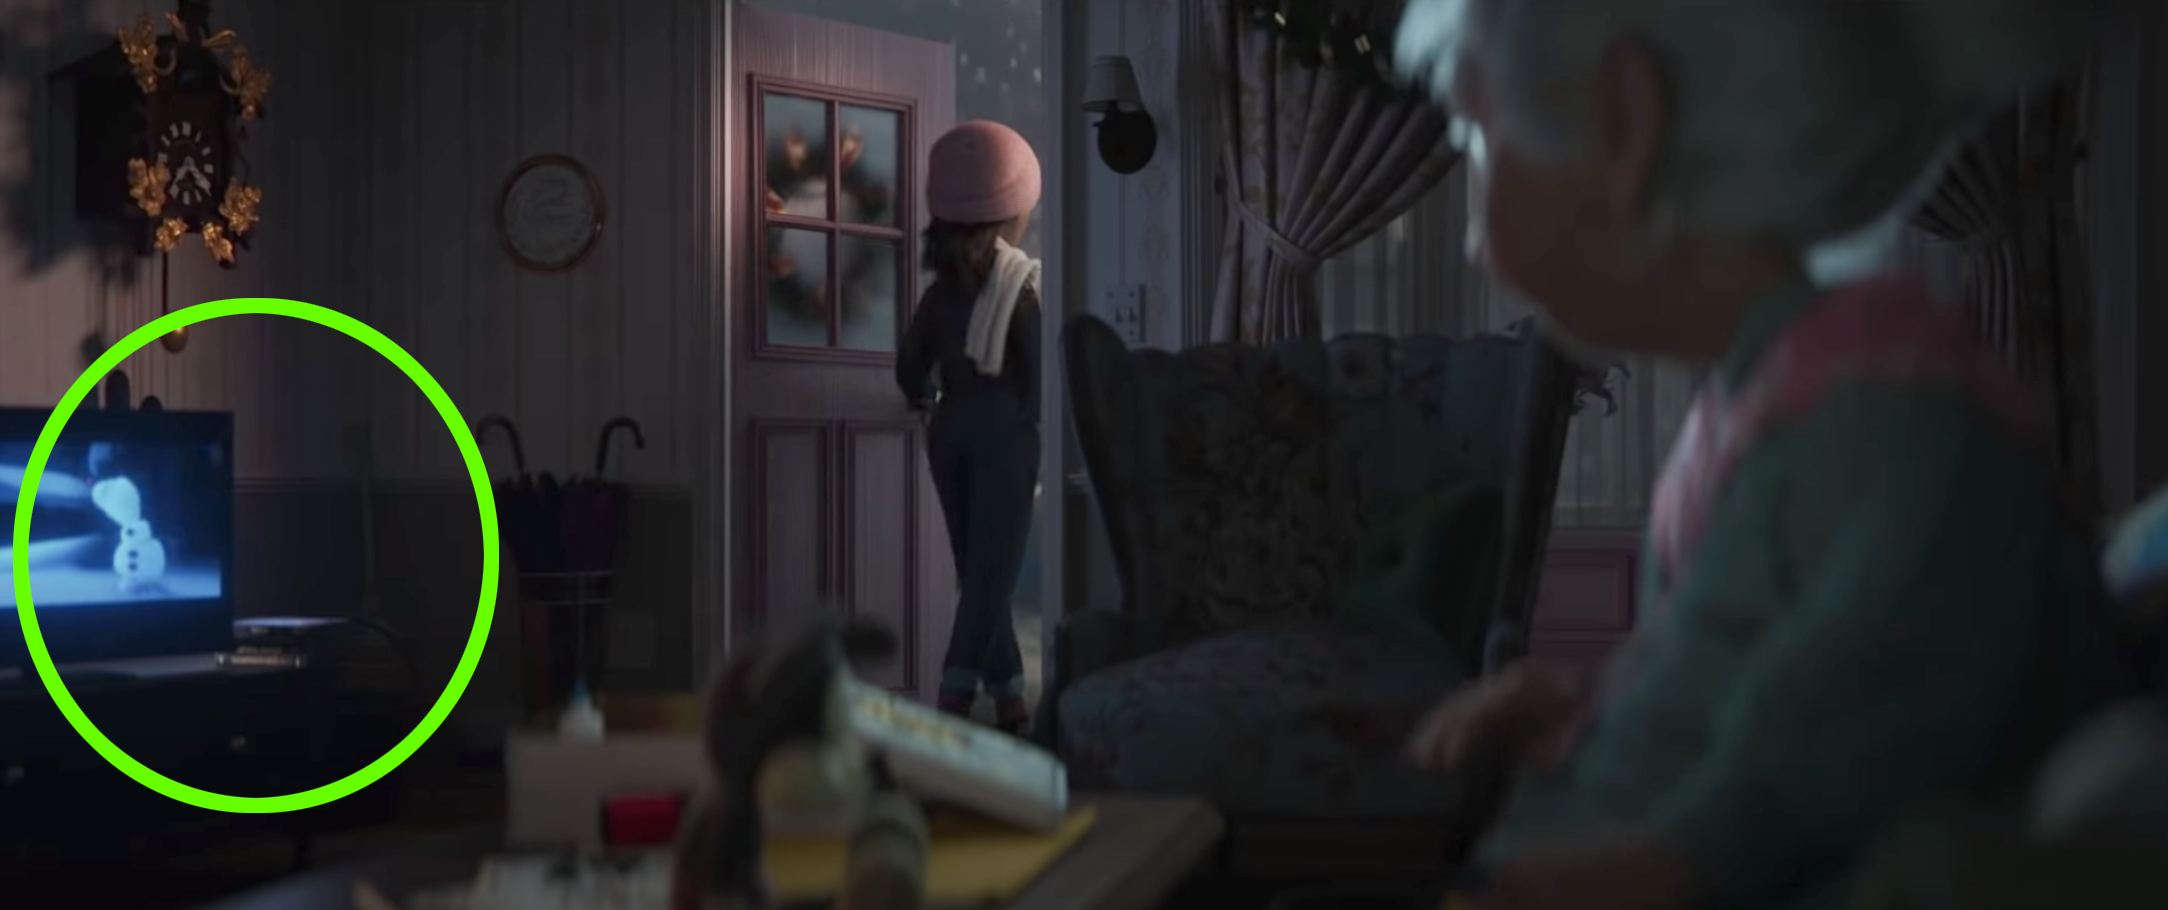 Grandma watching the short while her granddaughter walks out the door